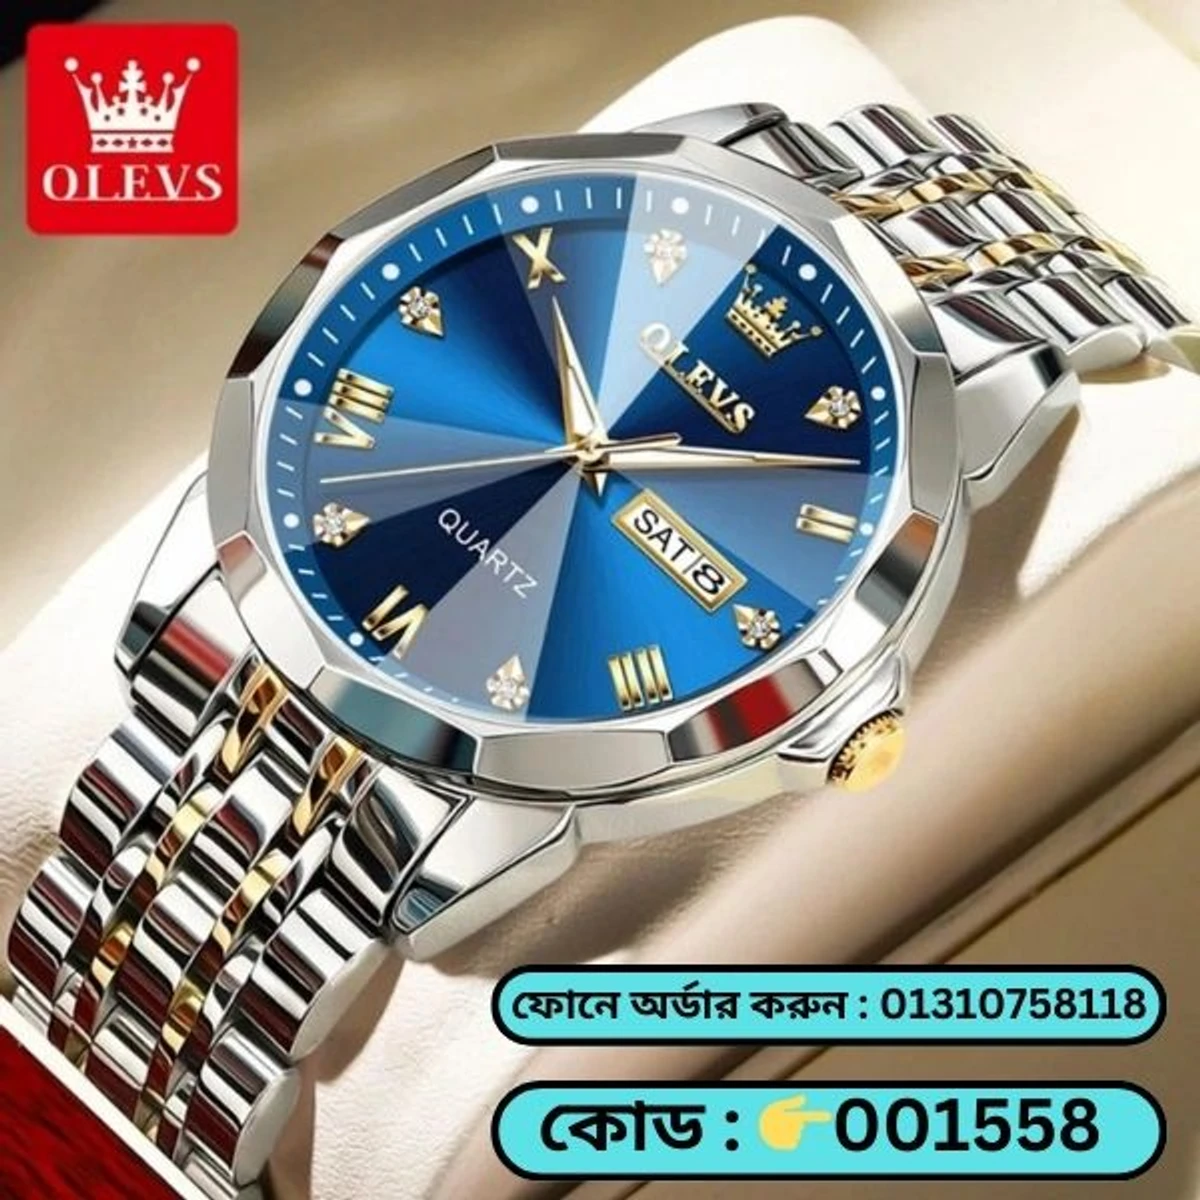 OLEVS MODEL 9931 Watch for Men Stainless Steel Watches - 9941 TOTON AR DIAL BLUE - MAN WATCH LOCK PUSH